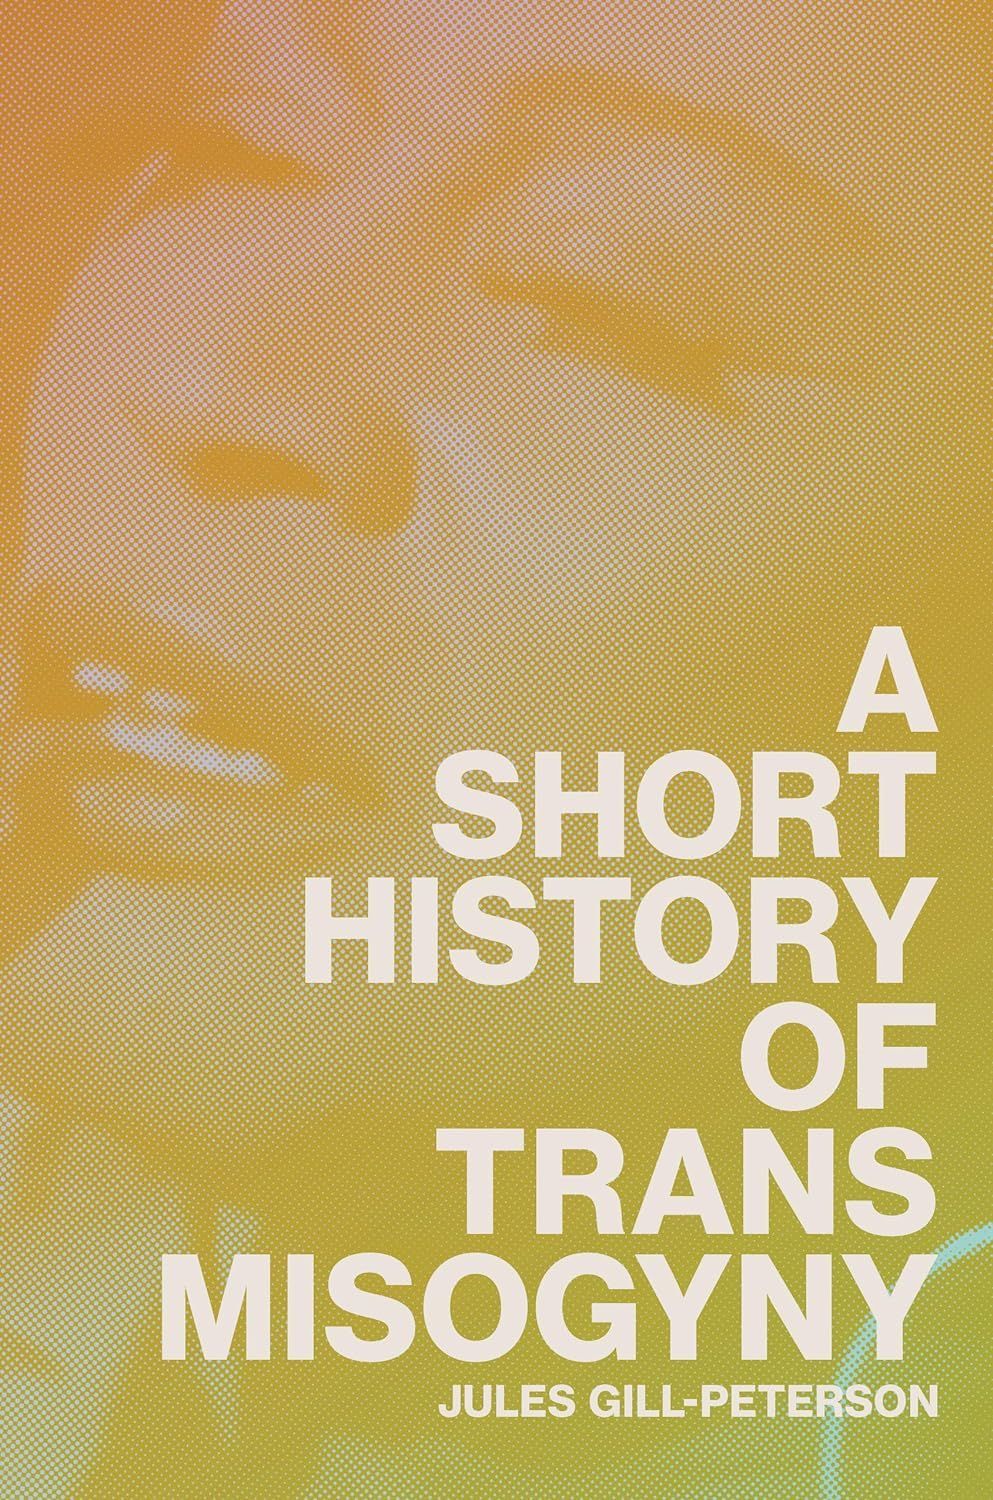 Trans Panic Otherwise: On Jules Gill-Peterson’s “A Short History of Trans Misogyny”